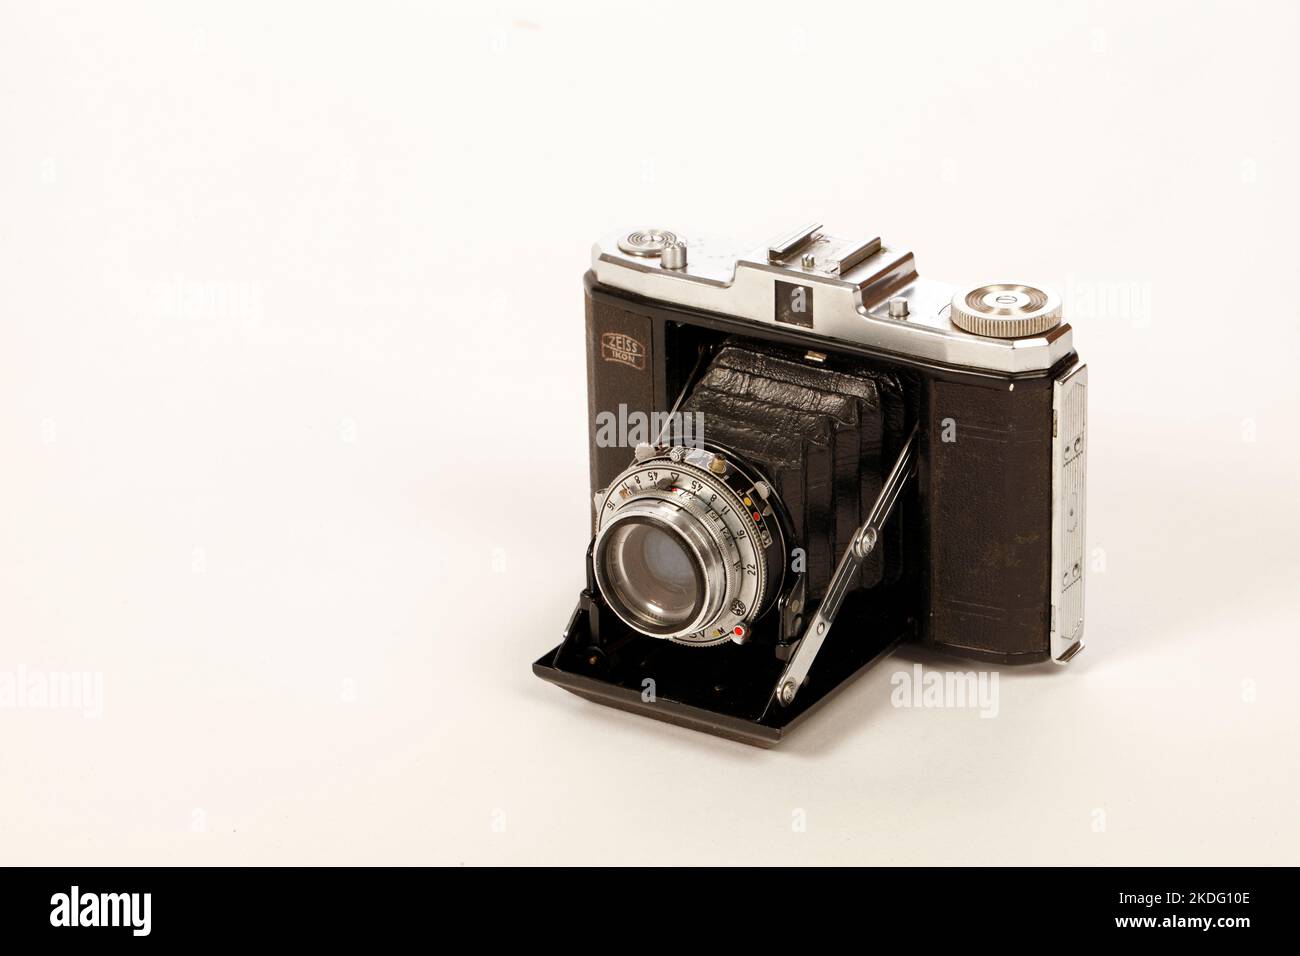 Prontor-SV compact bellows folding camera with a Zeiss Ikon Lens. Newspaper reporting Stock Photo